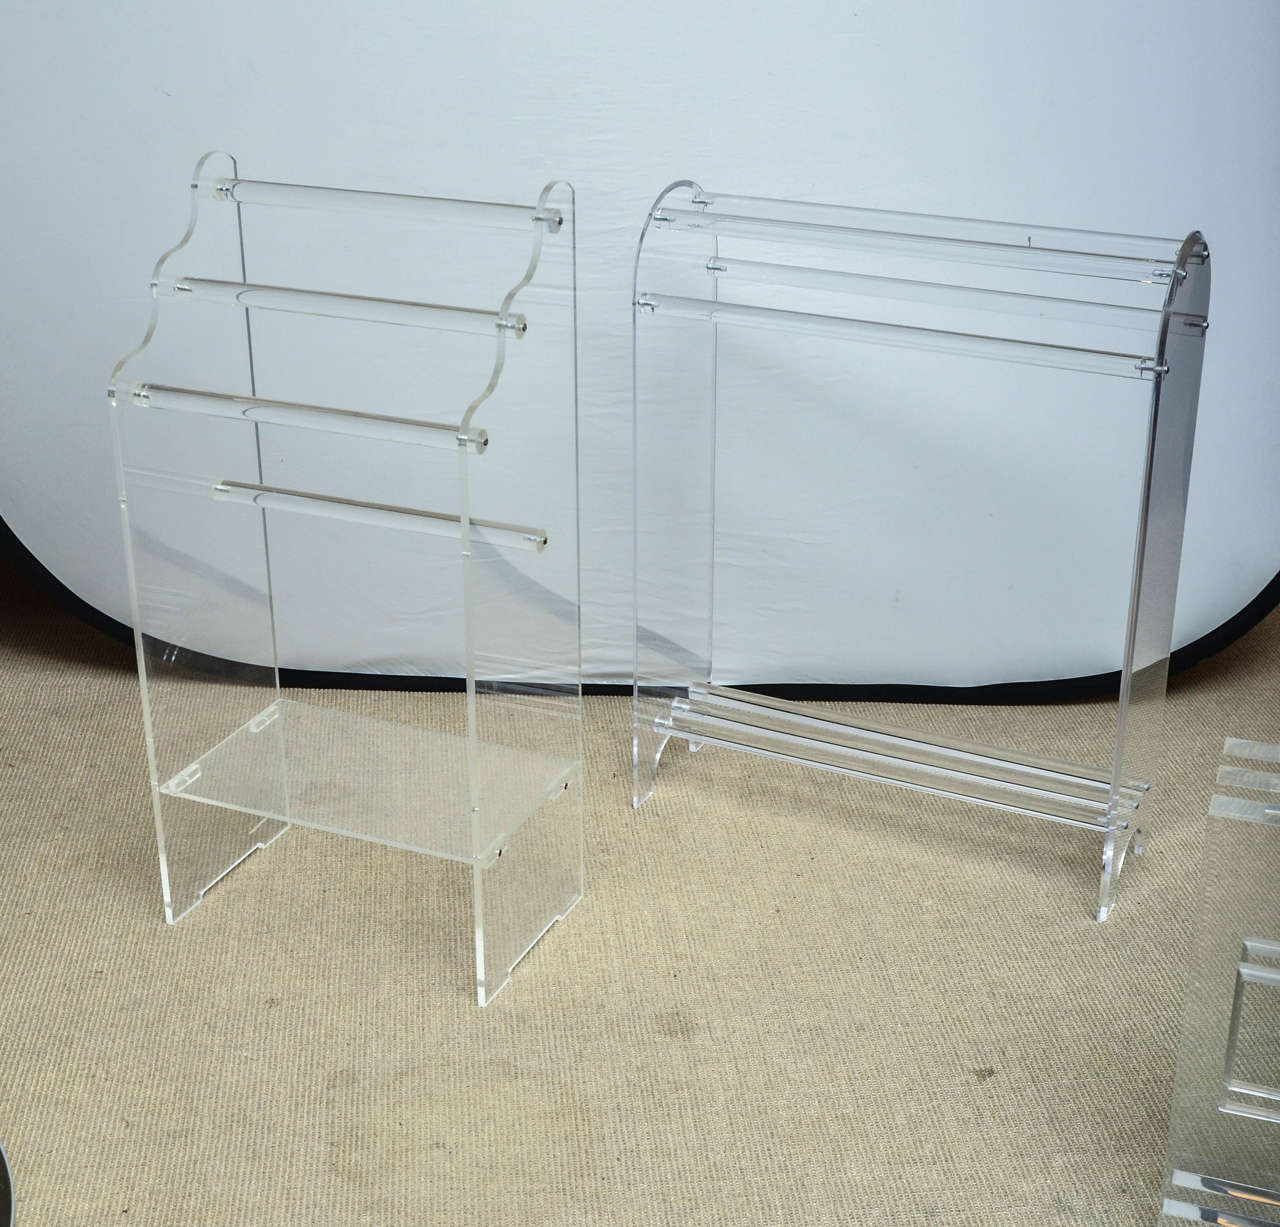 Two mid-century Lucite towel racks. The other rack measures 31.5H x 24.5W x 9D